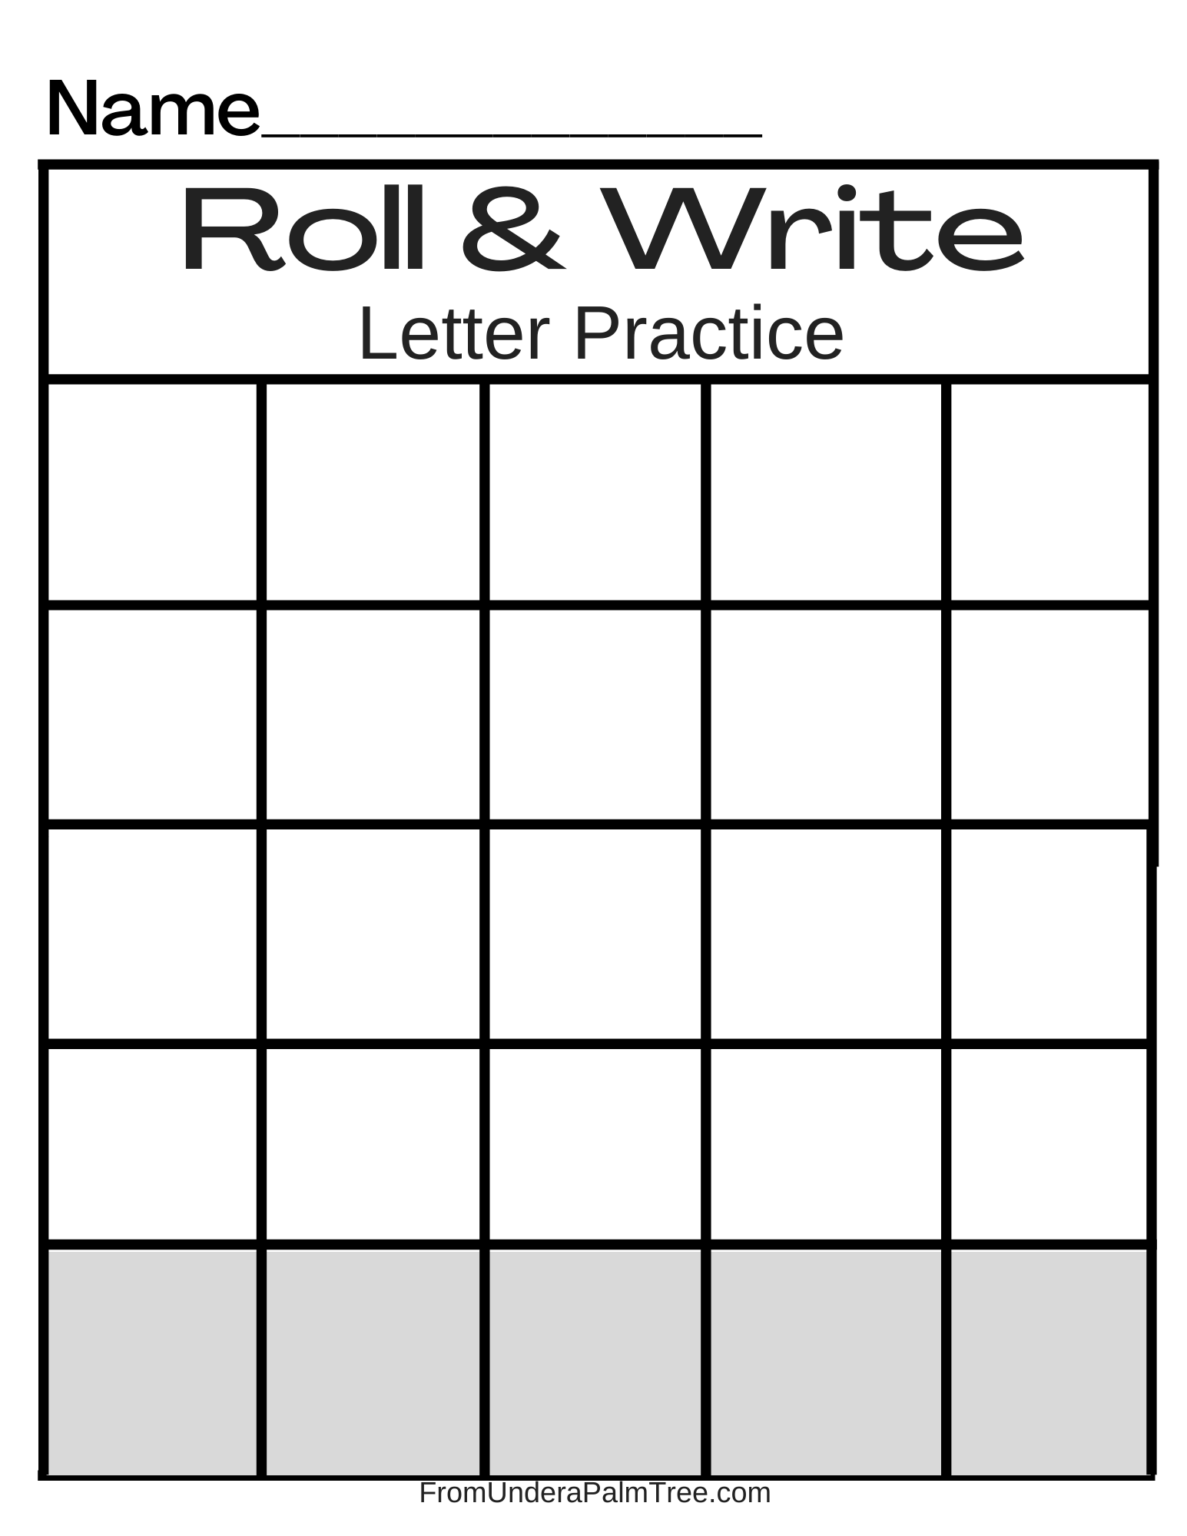 Roll & Write Letter Practice